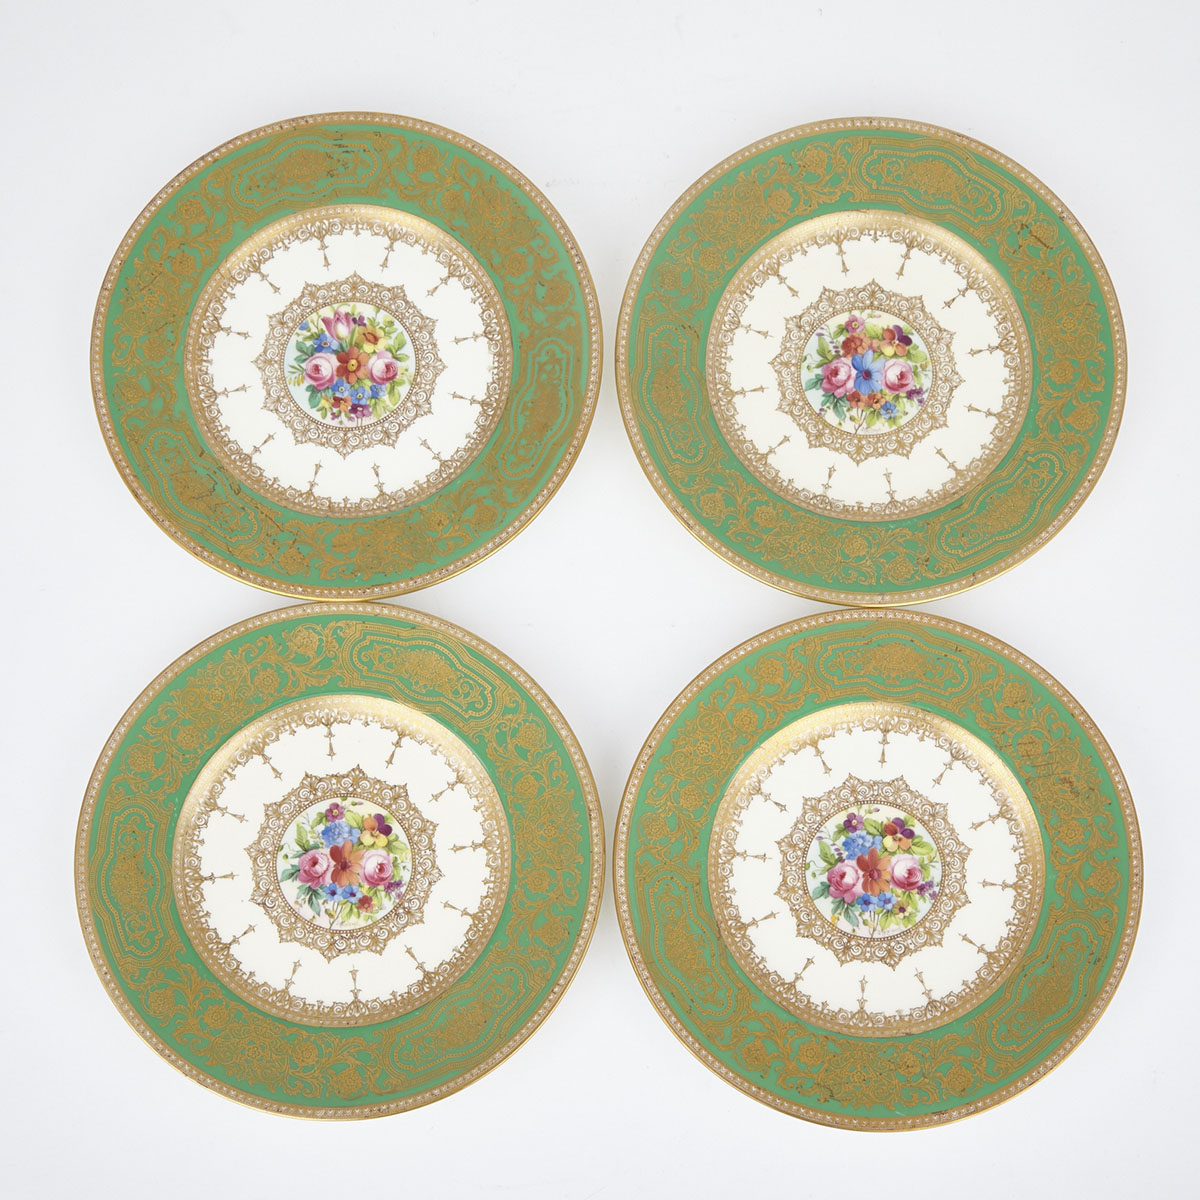 Four Minton Floral Centred Apple Green Ground Service Plates, Joseph Colclough, early 20th century